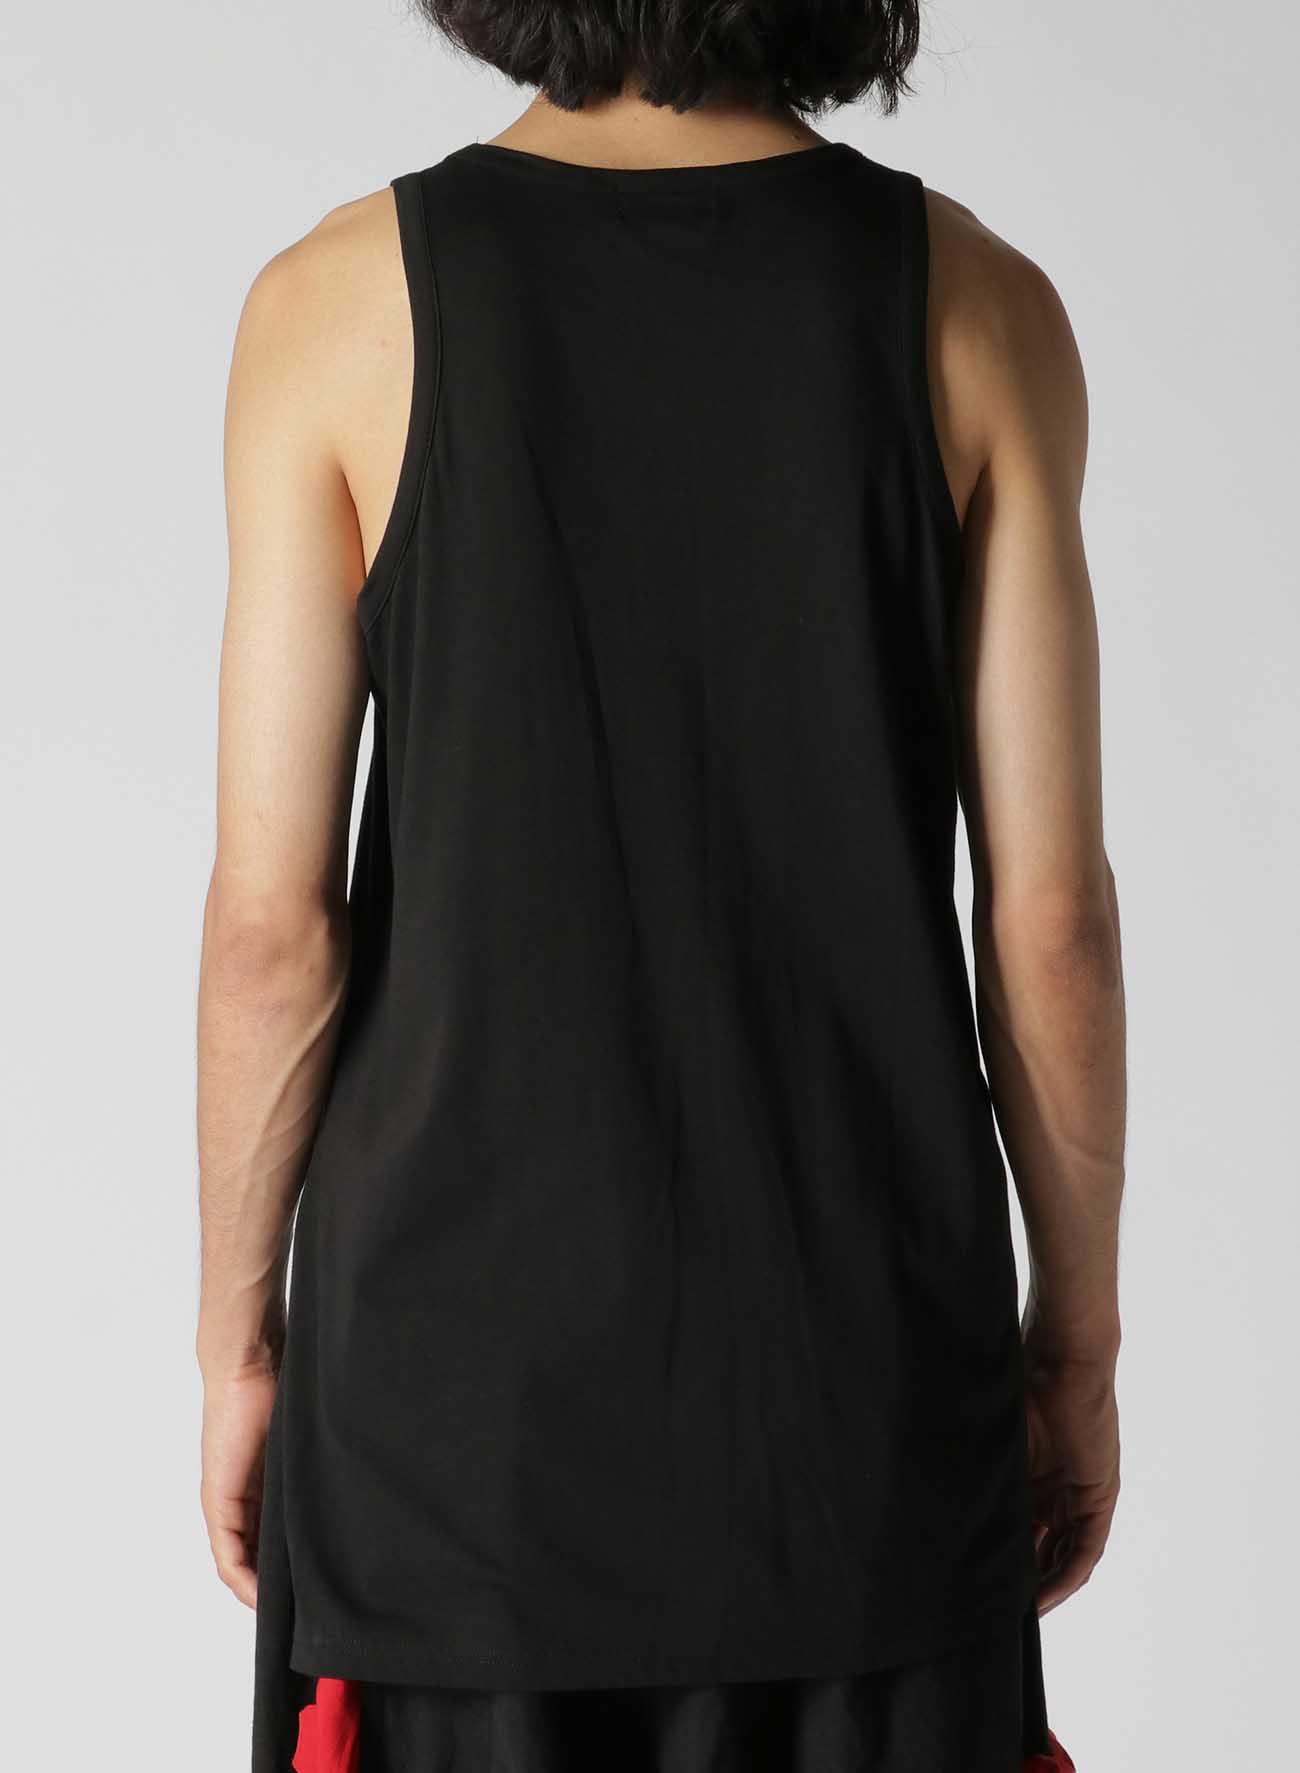 COMBED SINGLE JERSEY BINDER HENRY NECK TANK TOP